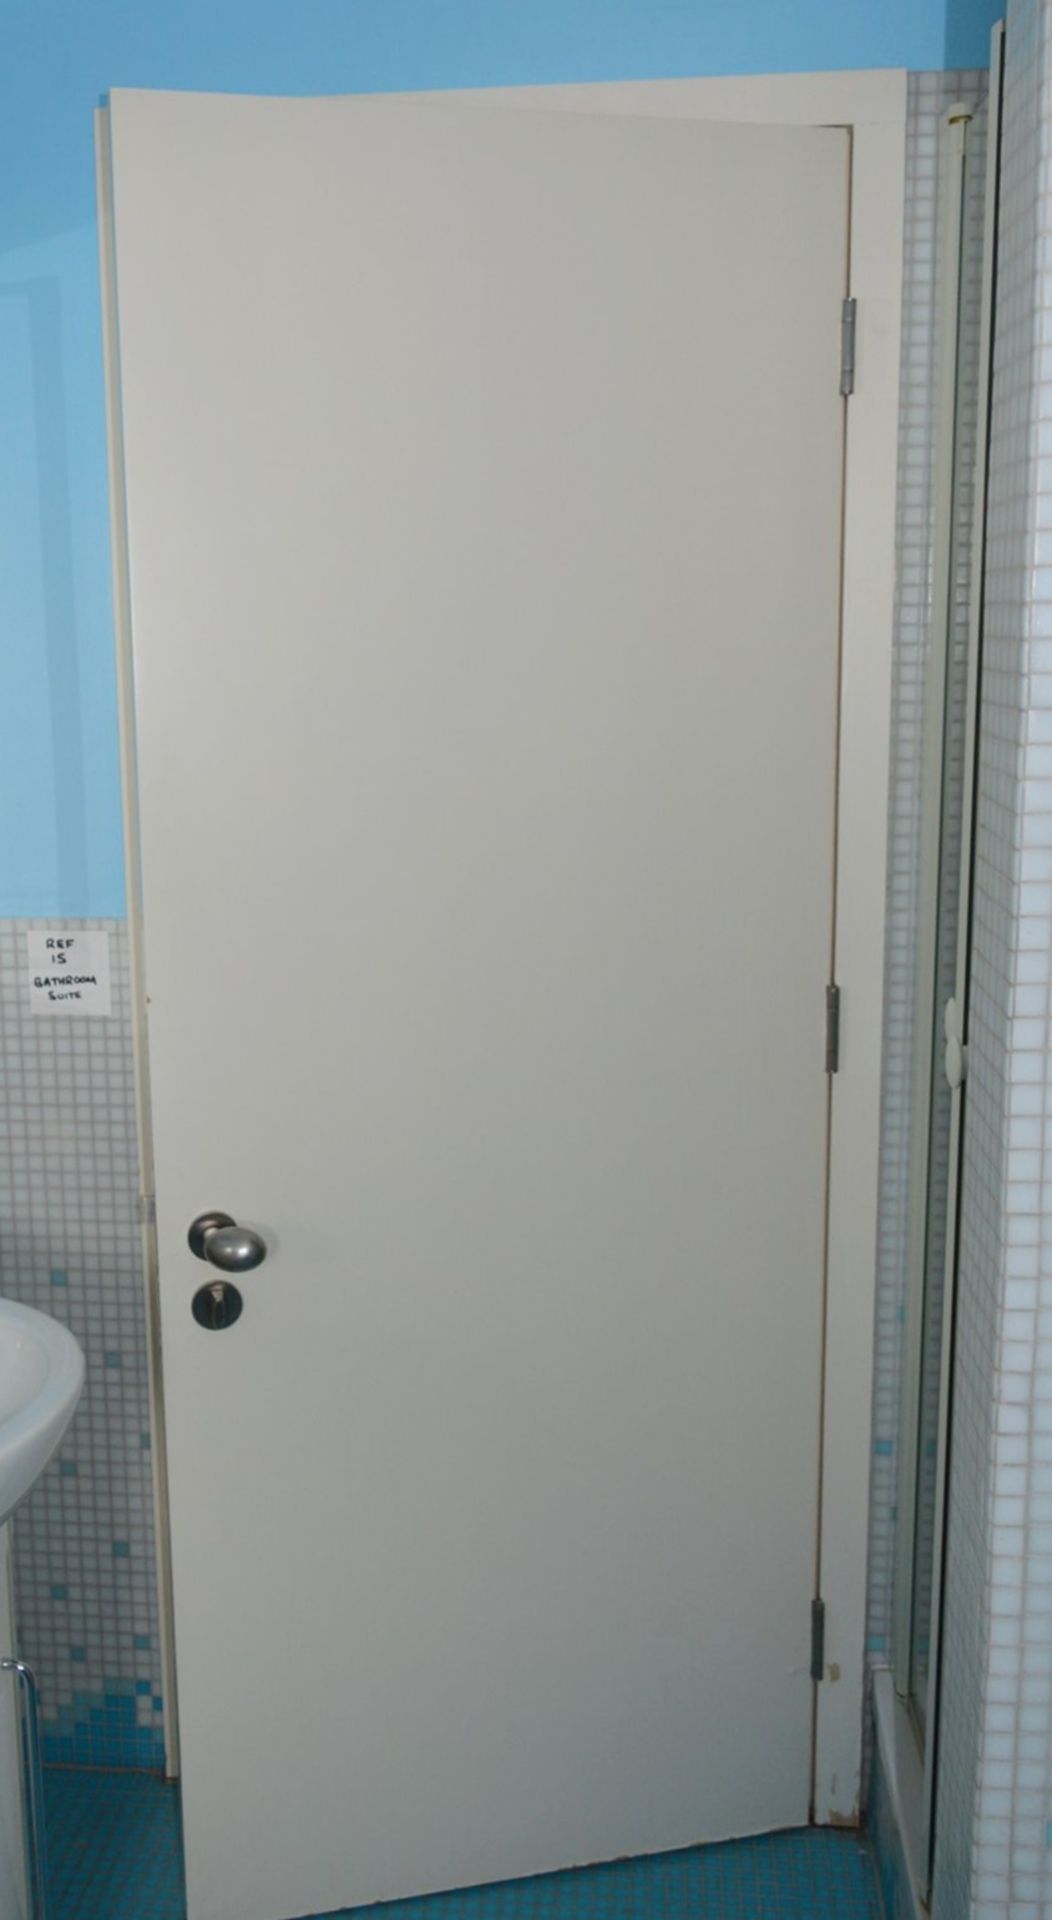 1 x Fire Resistant Internal Door - Fitted With Stylish Chrome Door Knobs, Triple Hinges and - Image 2 of 4